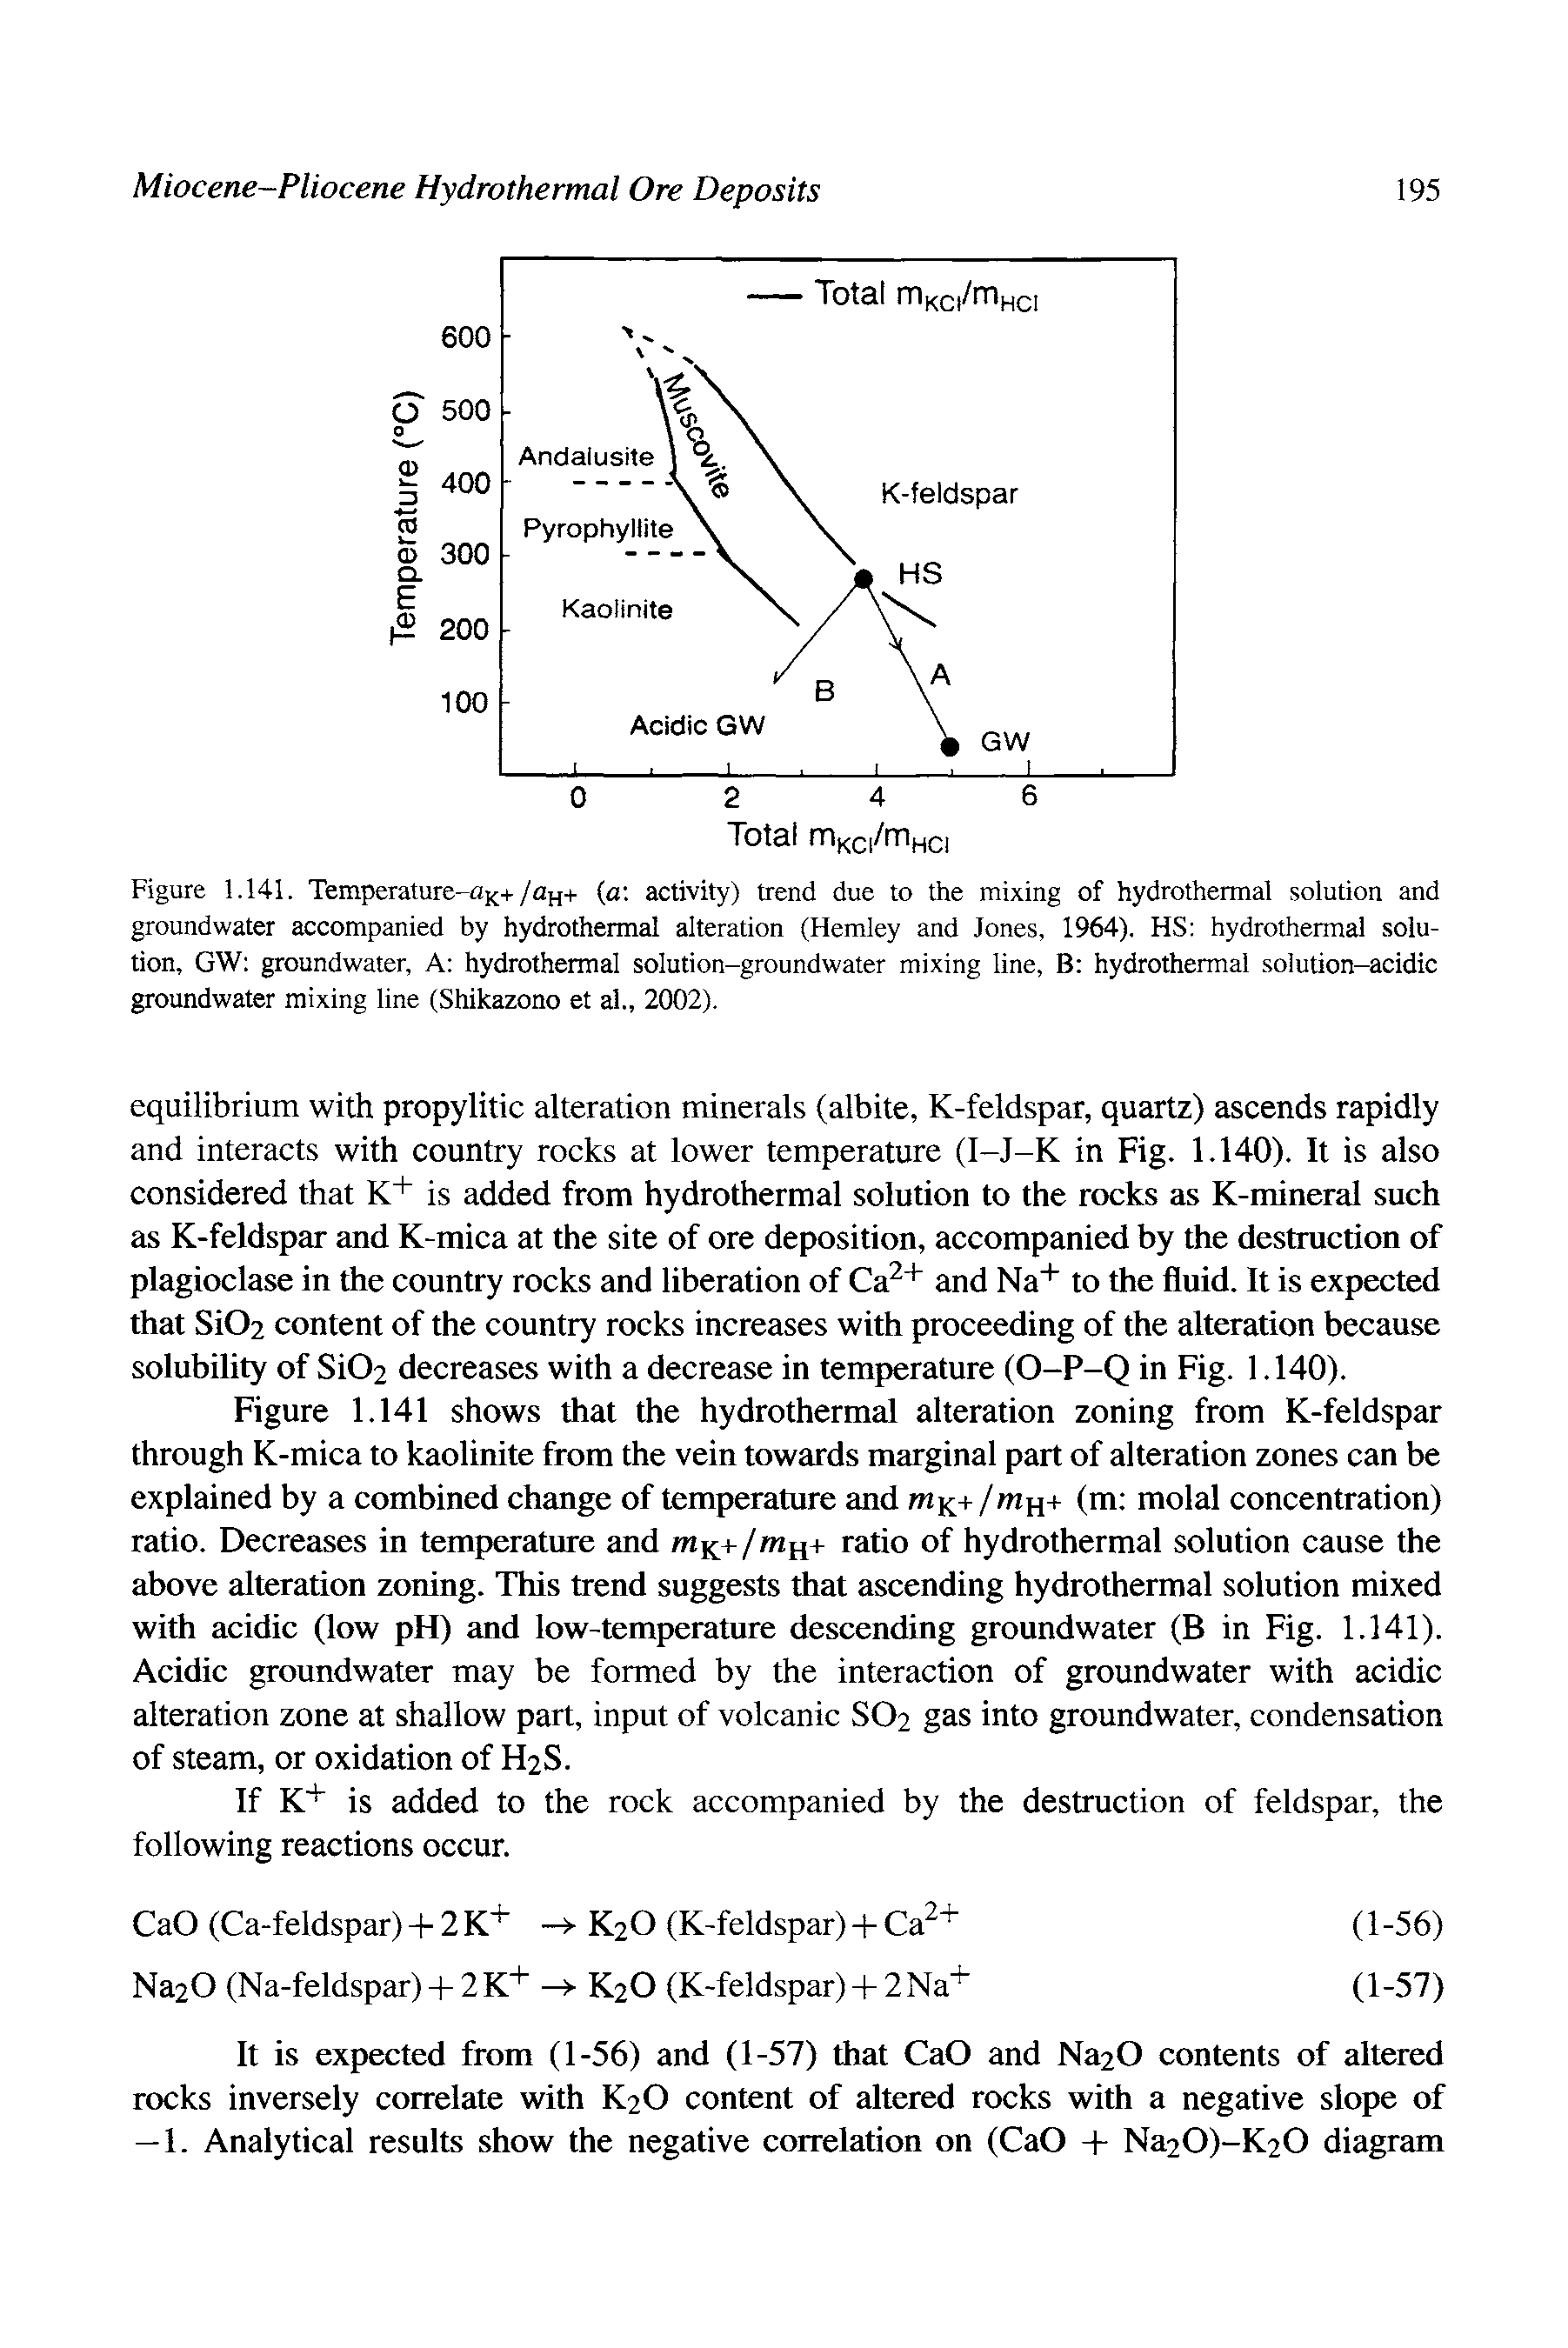 Figure 1.141. Temperature-aK+/°H+ activity) trend due to the mixing of hydrothermal solution and groundwater accompanied by hydrothermal alteration (Hemley and Jones, 1964). HS hydrothermal solution, GW groundwater, A hydrothermal solution-groundwater mixing line, B hydrothermal solution-acidic groundwater mixing line (Shikazono et al., 2002).